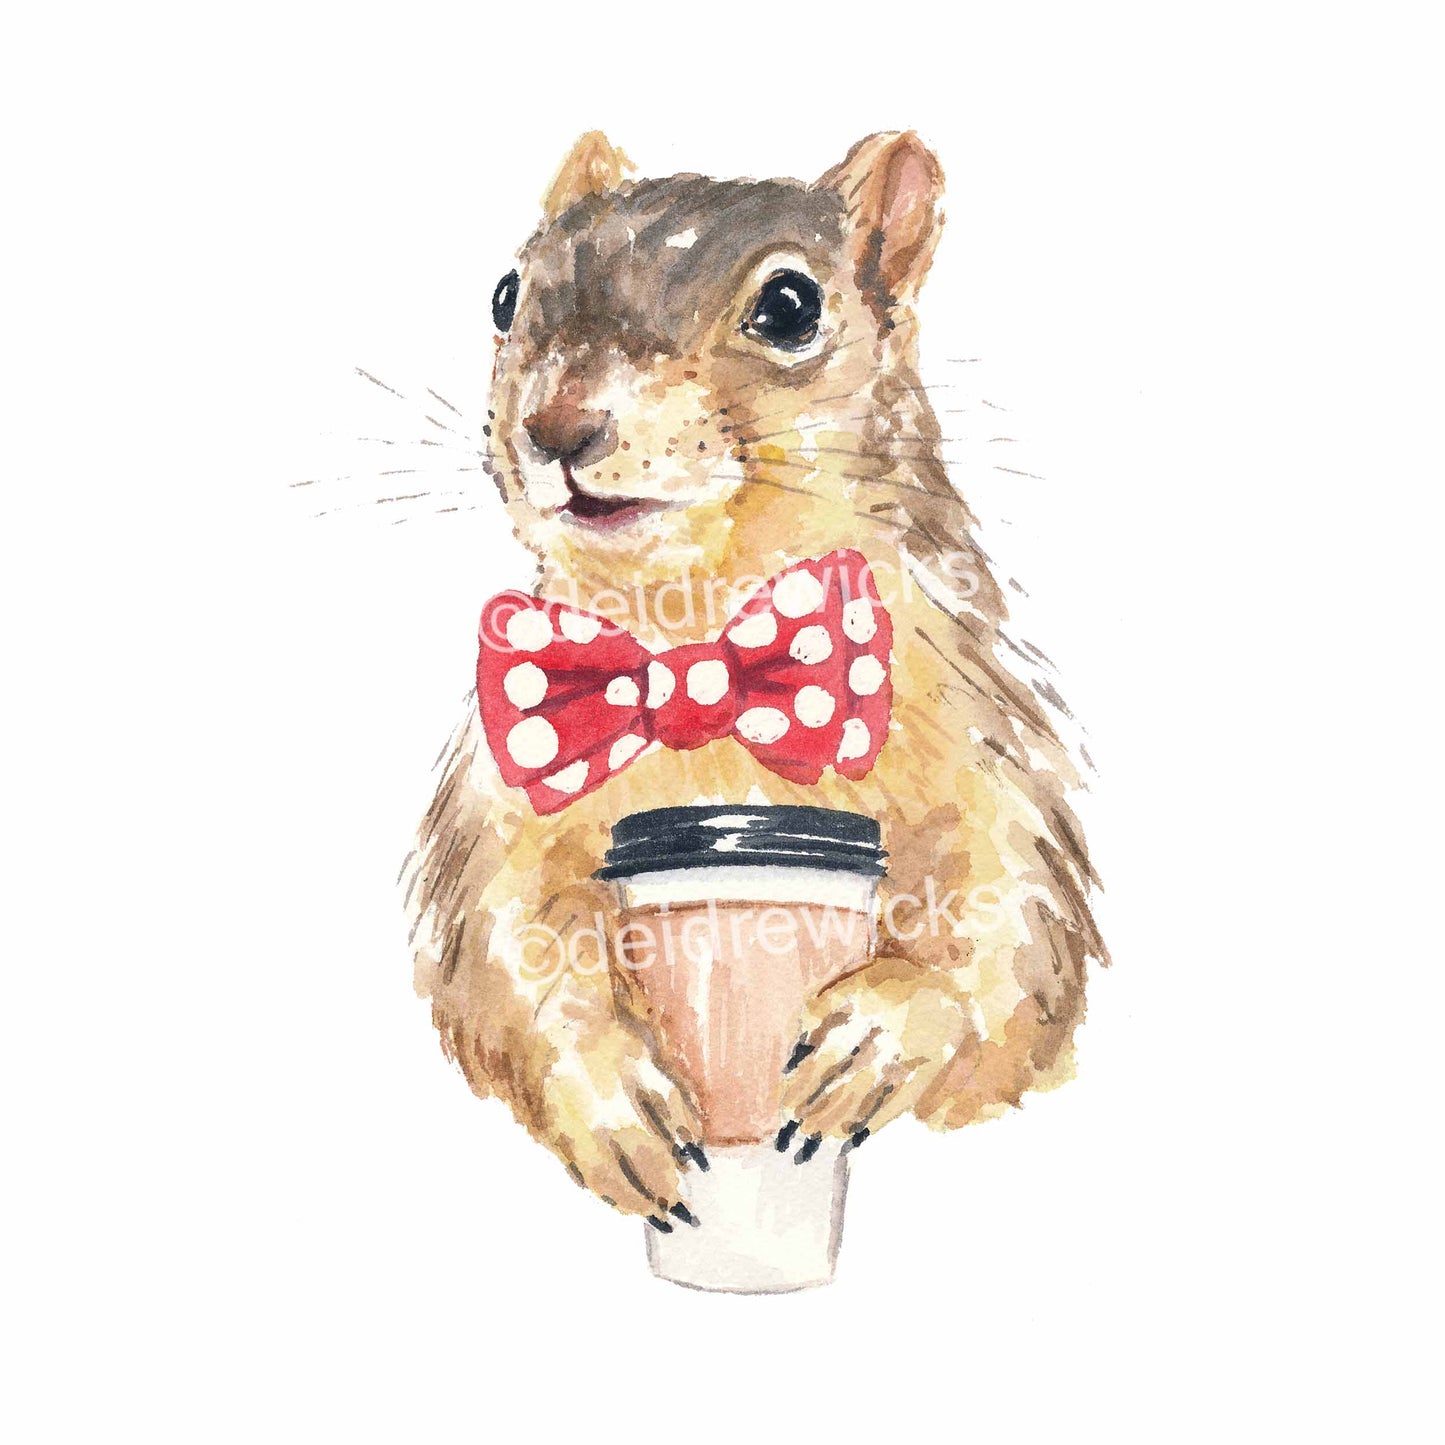 Watercolour painting of a squirrel with a bowtie drinking coffee. Art by Deidre Wicks 